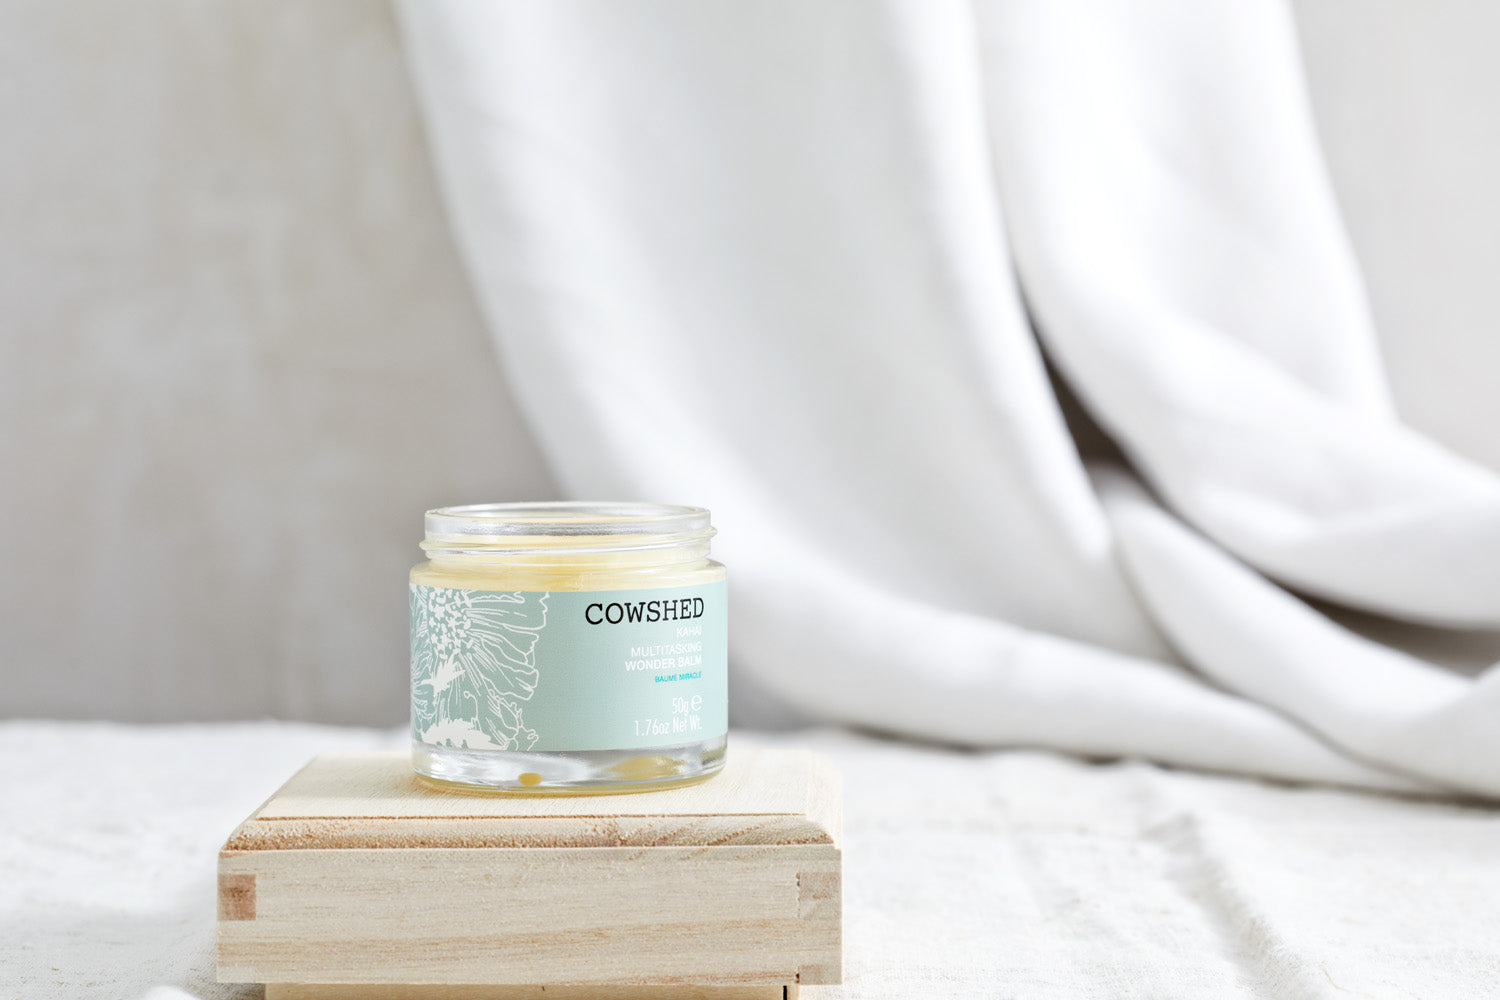 Kirsty Whyte - Cowshed Wonderbalm - Soho House